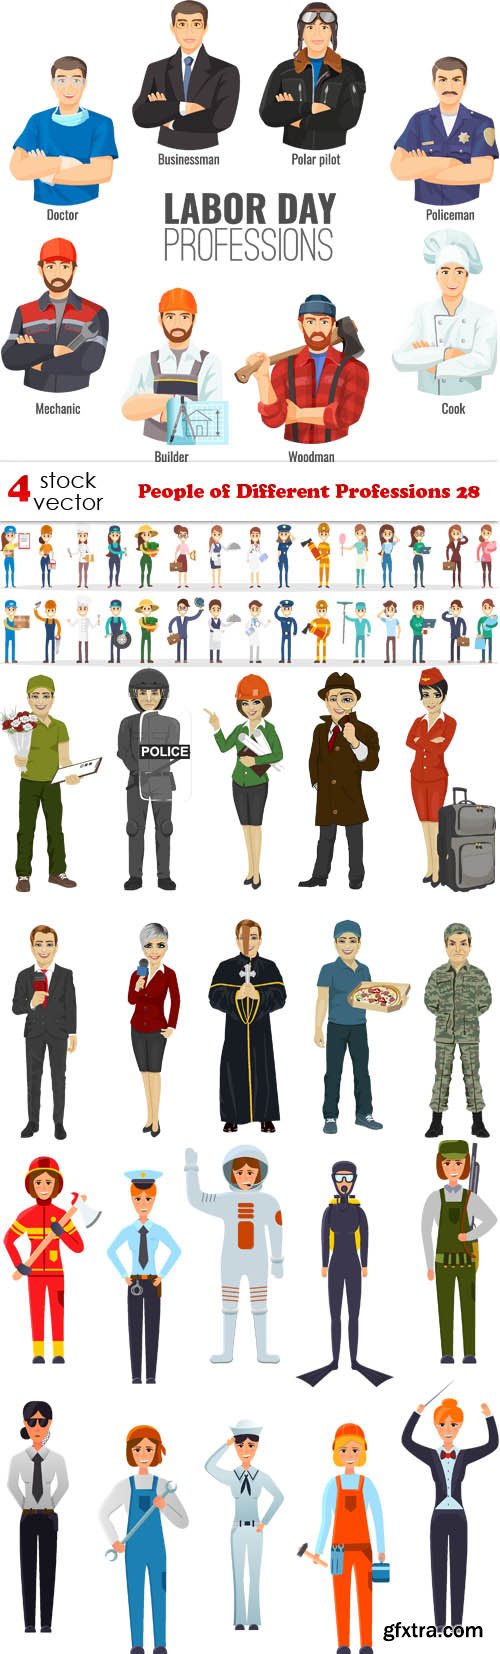 Vectors - People of Different Professions 28